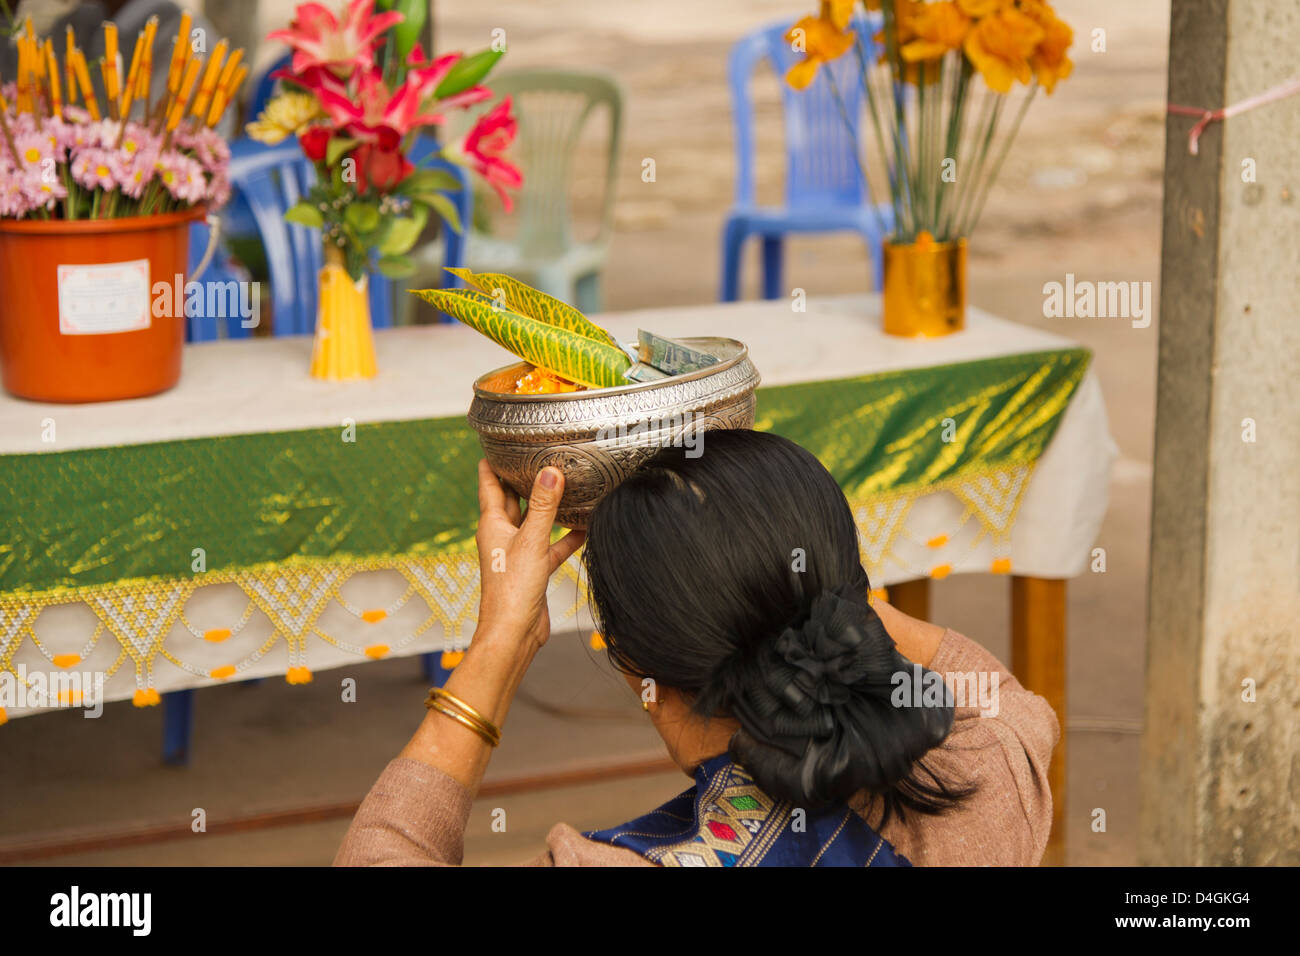 A dark-haired woman holds a metal bowl filled with offerings up to her forehead Stock Photo